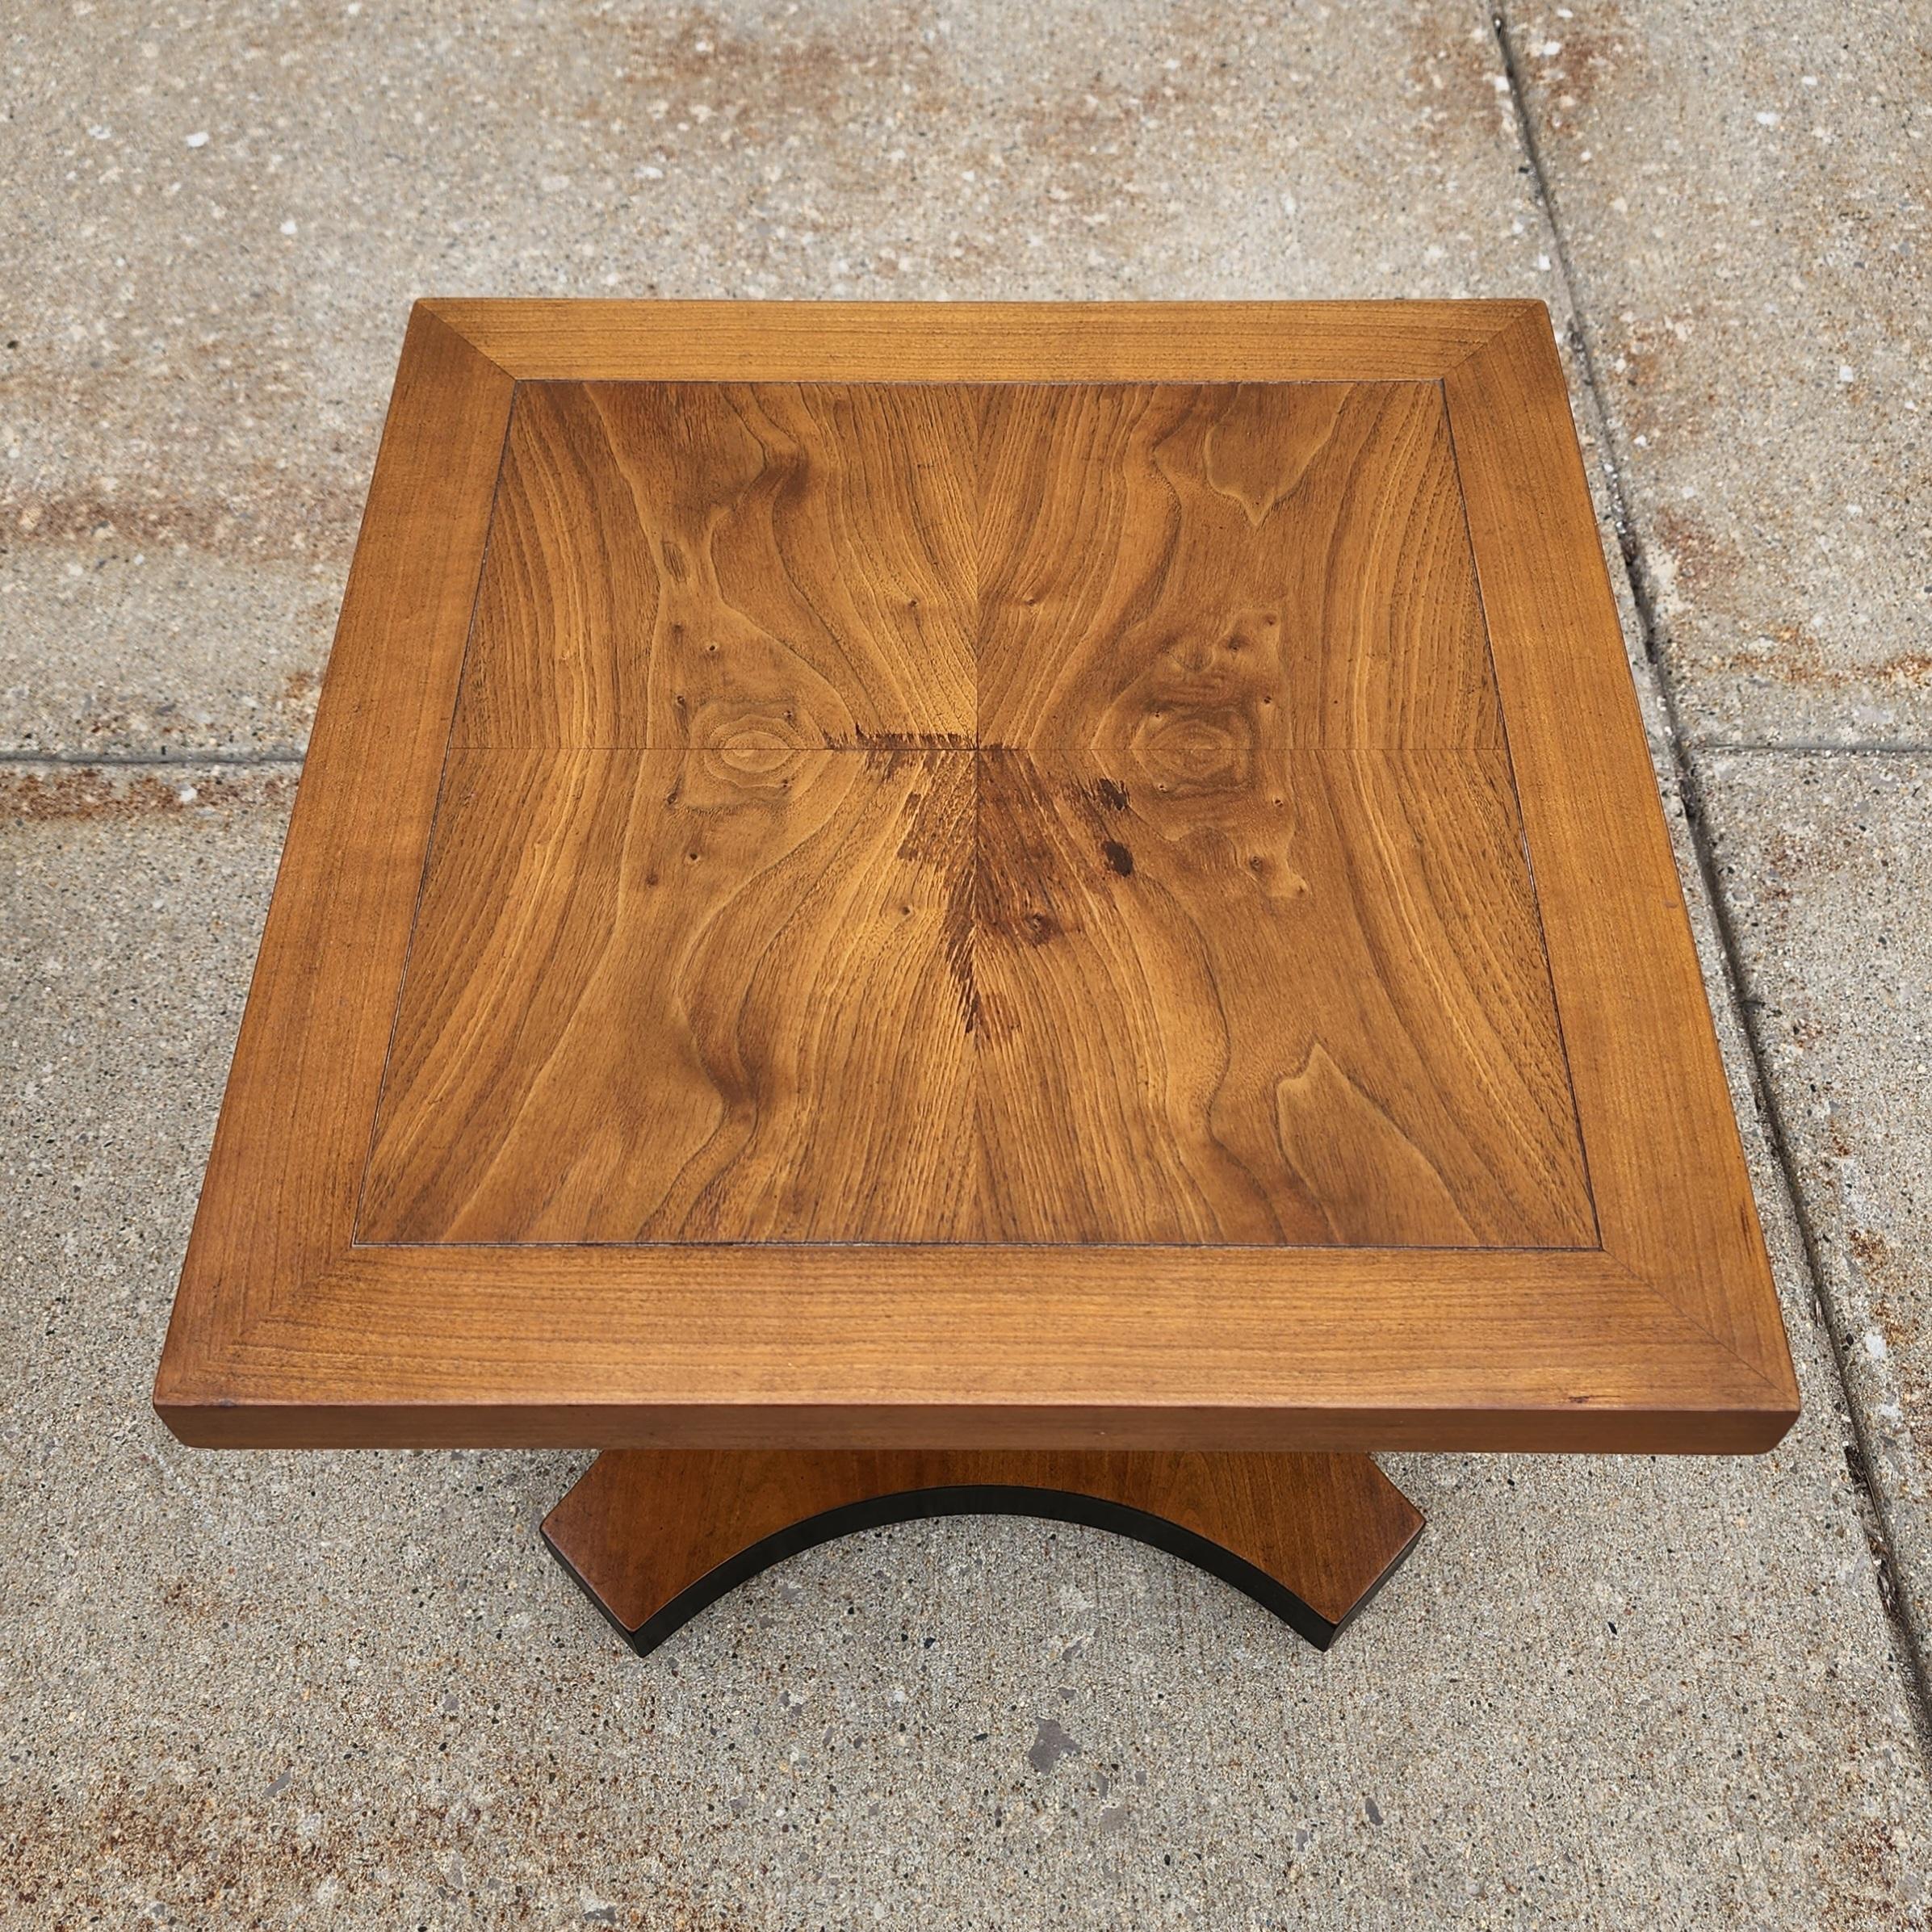 Midcentury Burl Wood Walnut Side Tables by Baker Furniture, a Pair 1